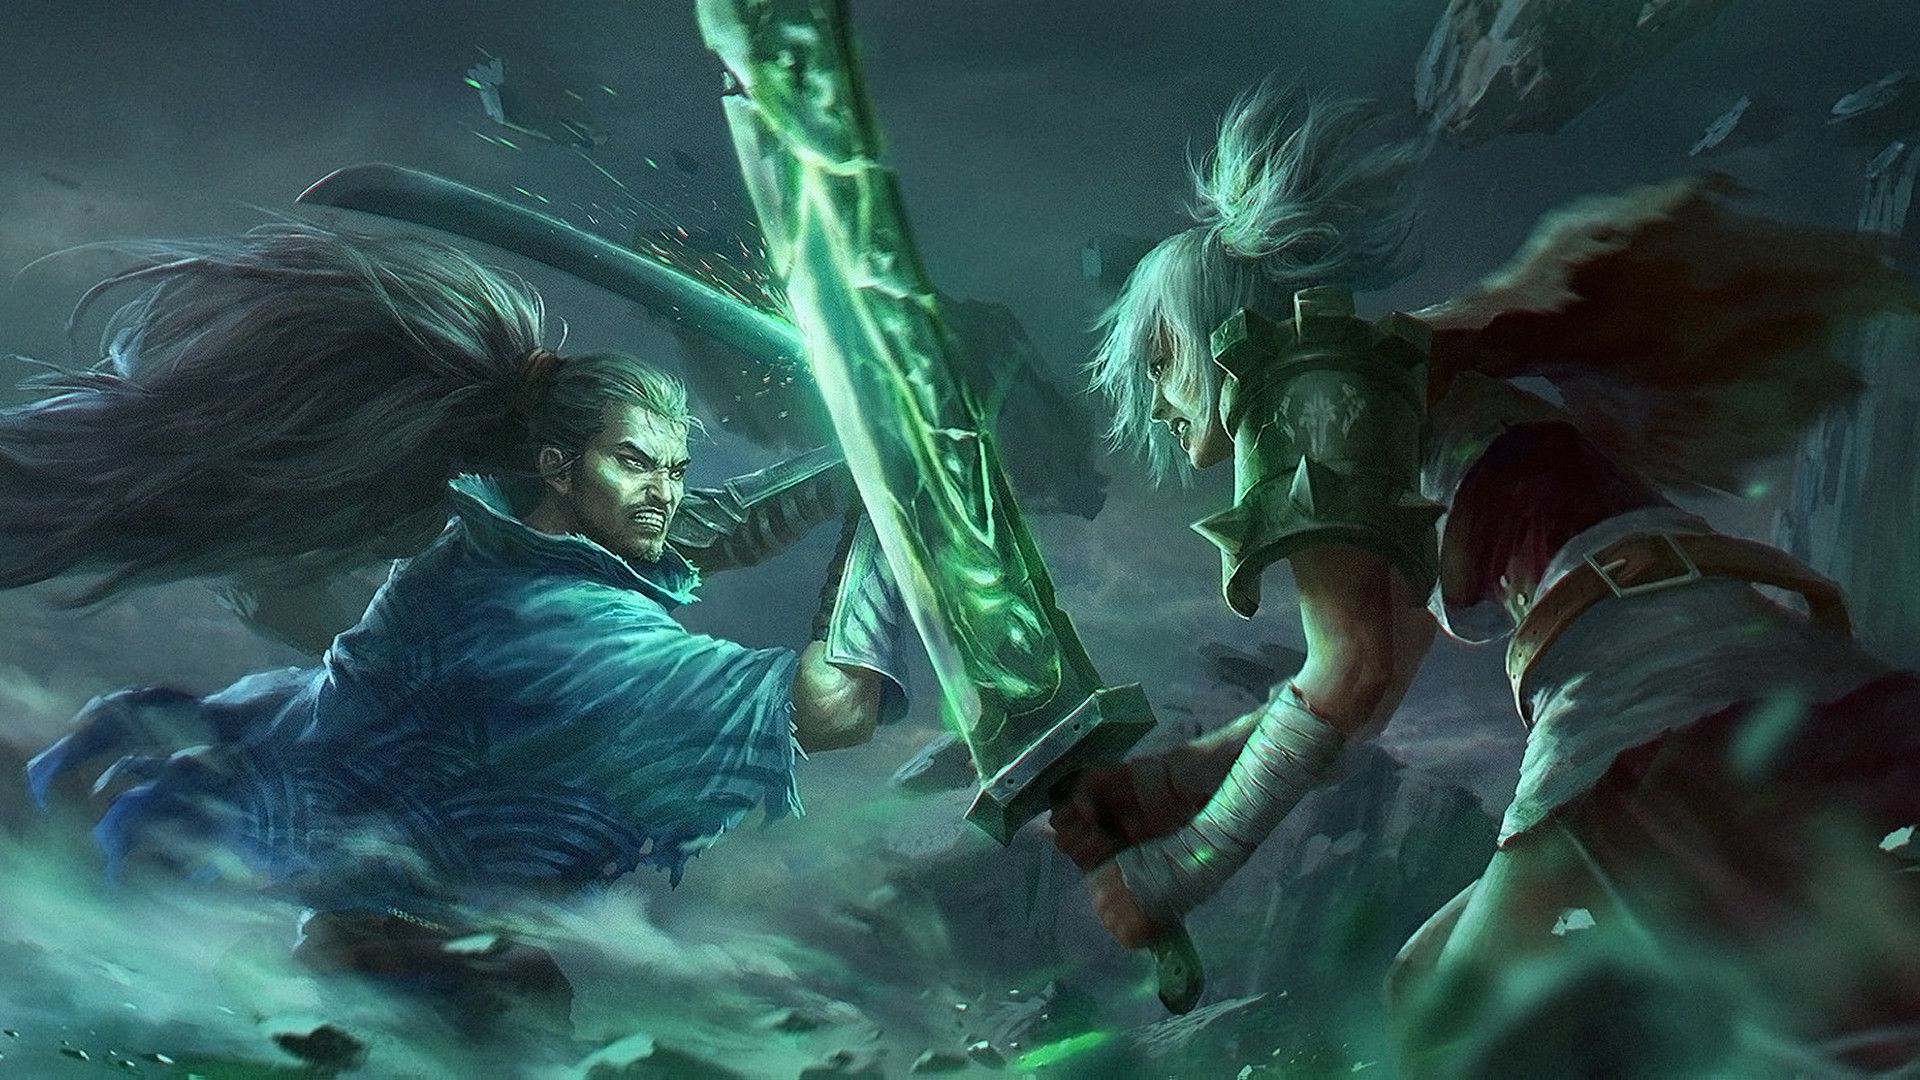 Wallpaper Riven, yasuo, league of legends, online game, fight